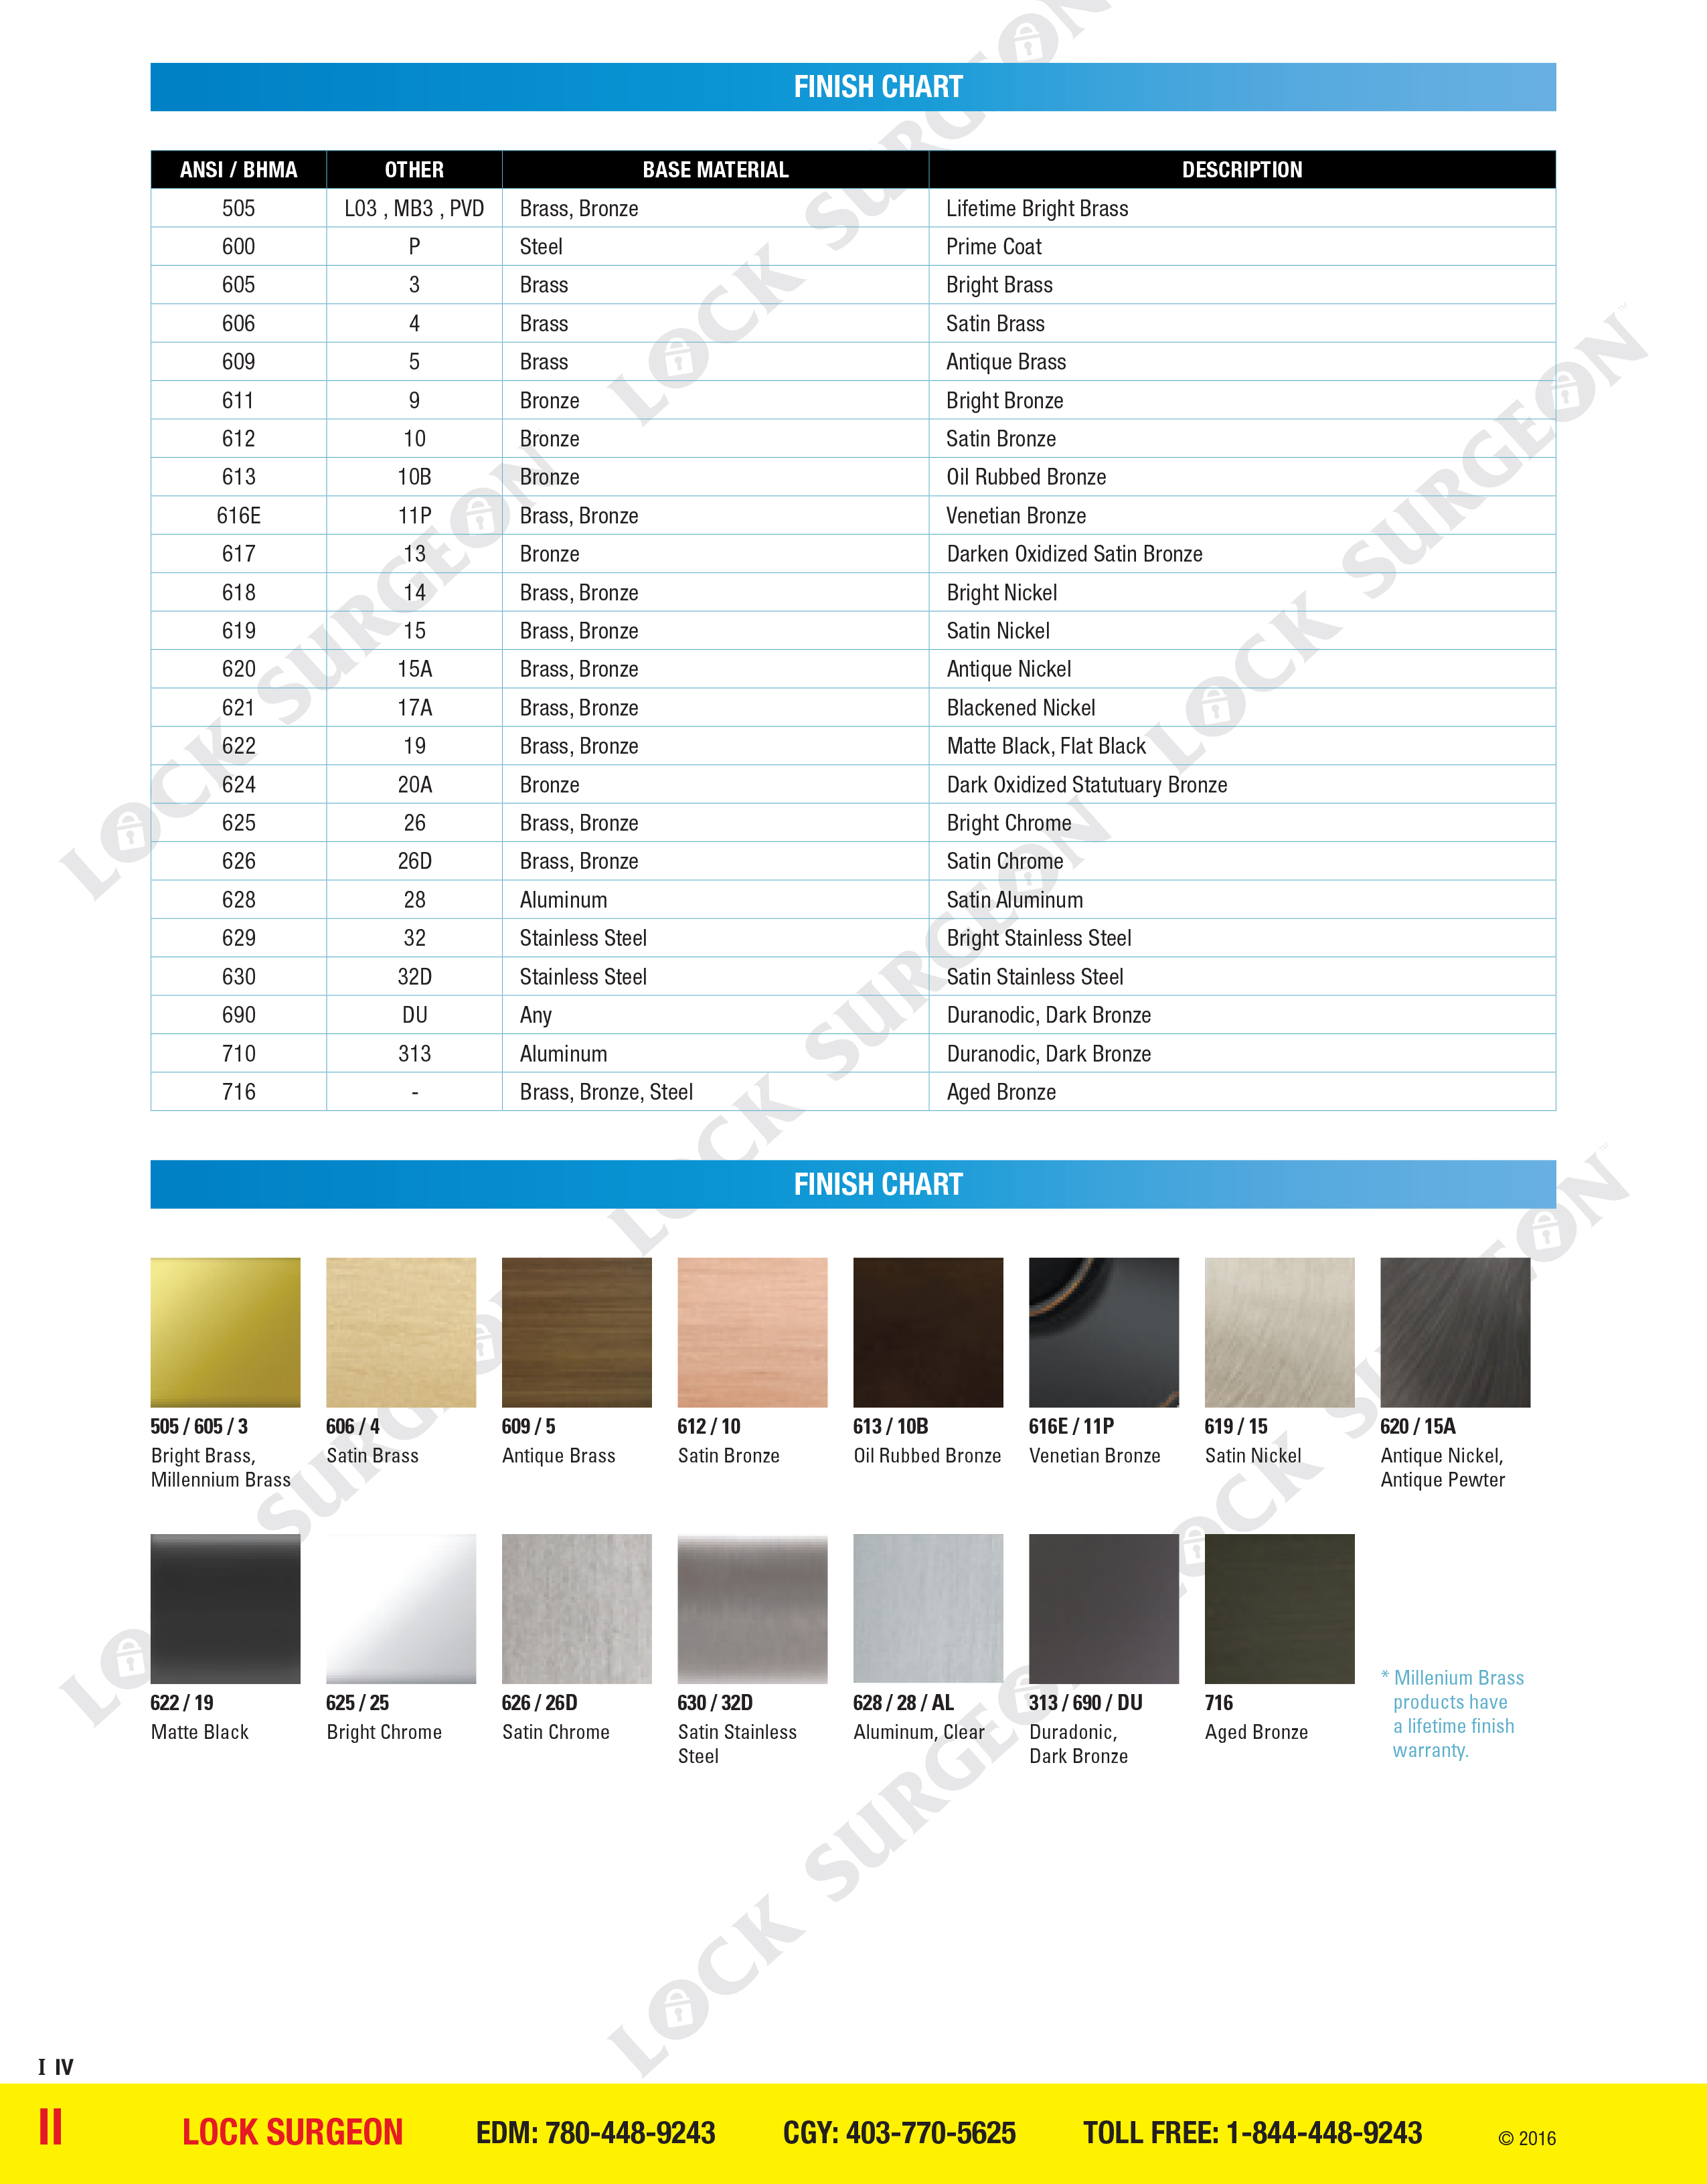 Colour reference chart for colour finishes on door handle hardware products Spruce Grove.